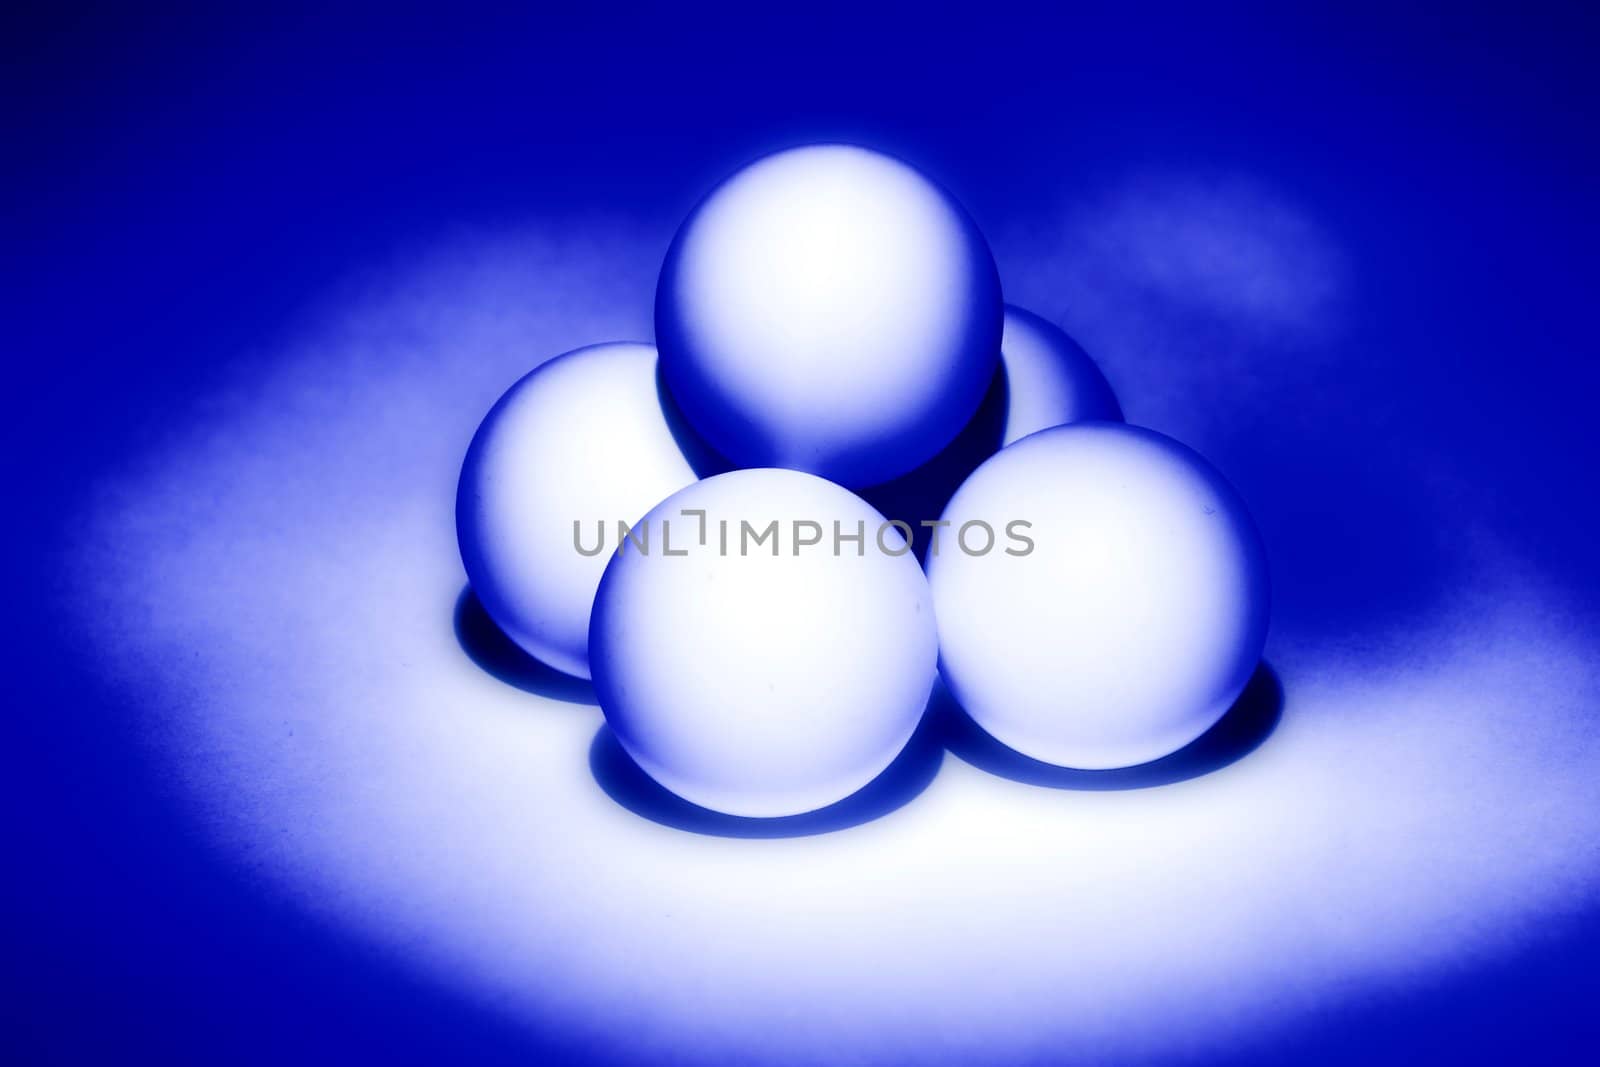 four white balls for table tennis built a pyramid and illuminated from beneath blue light